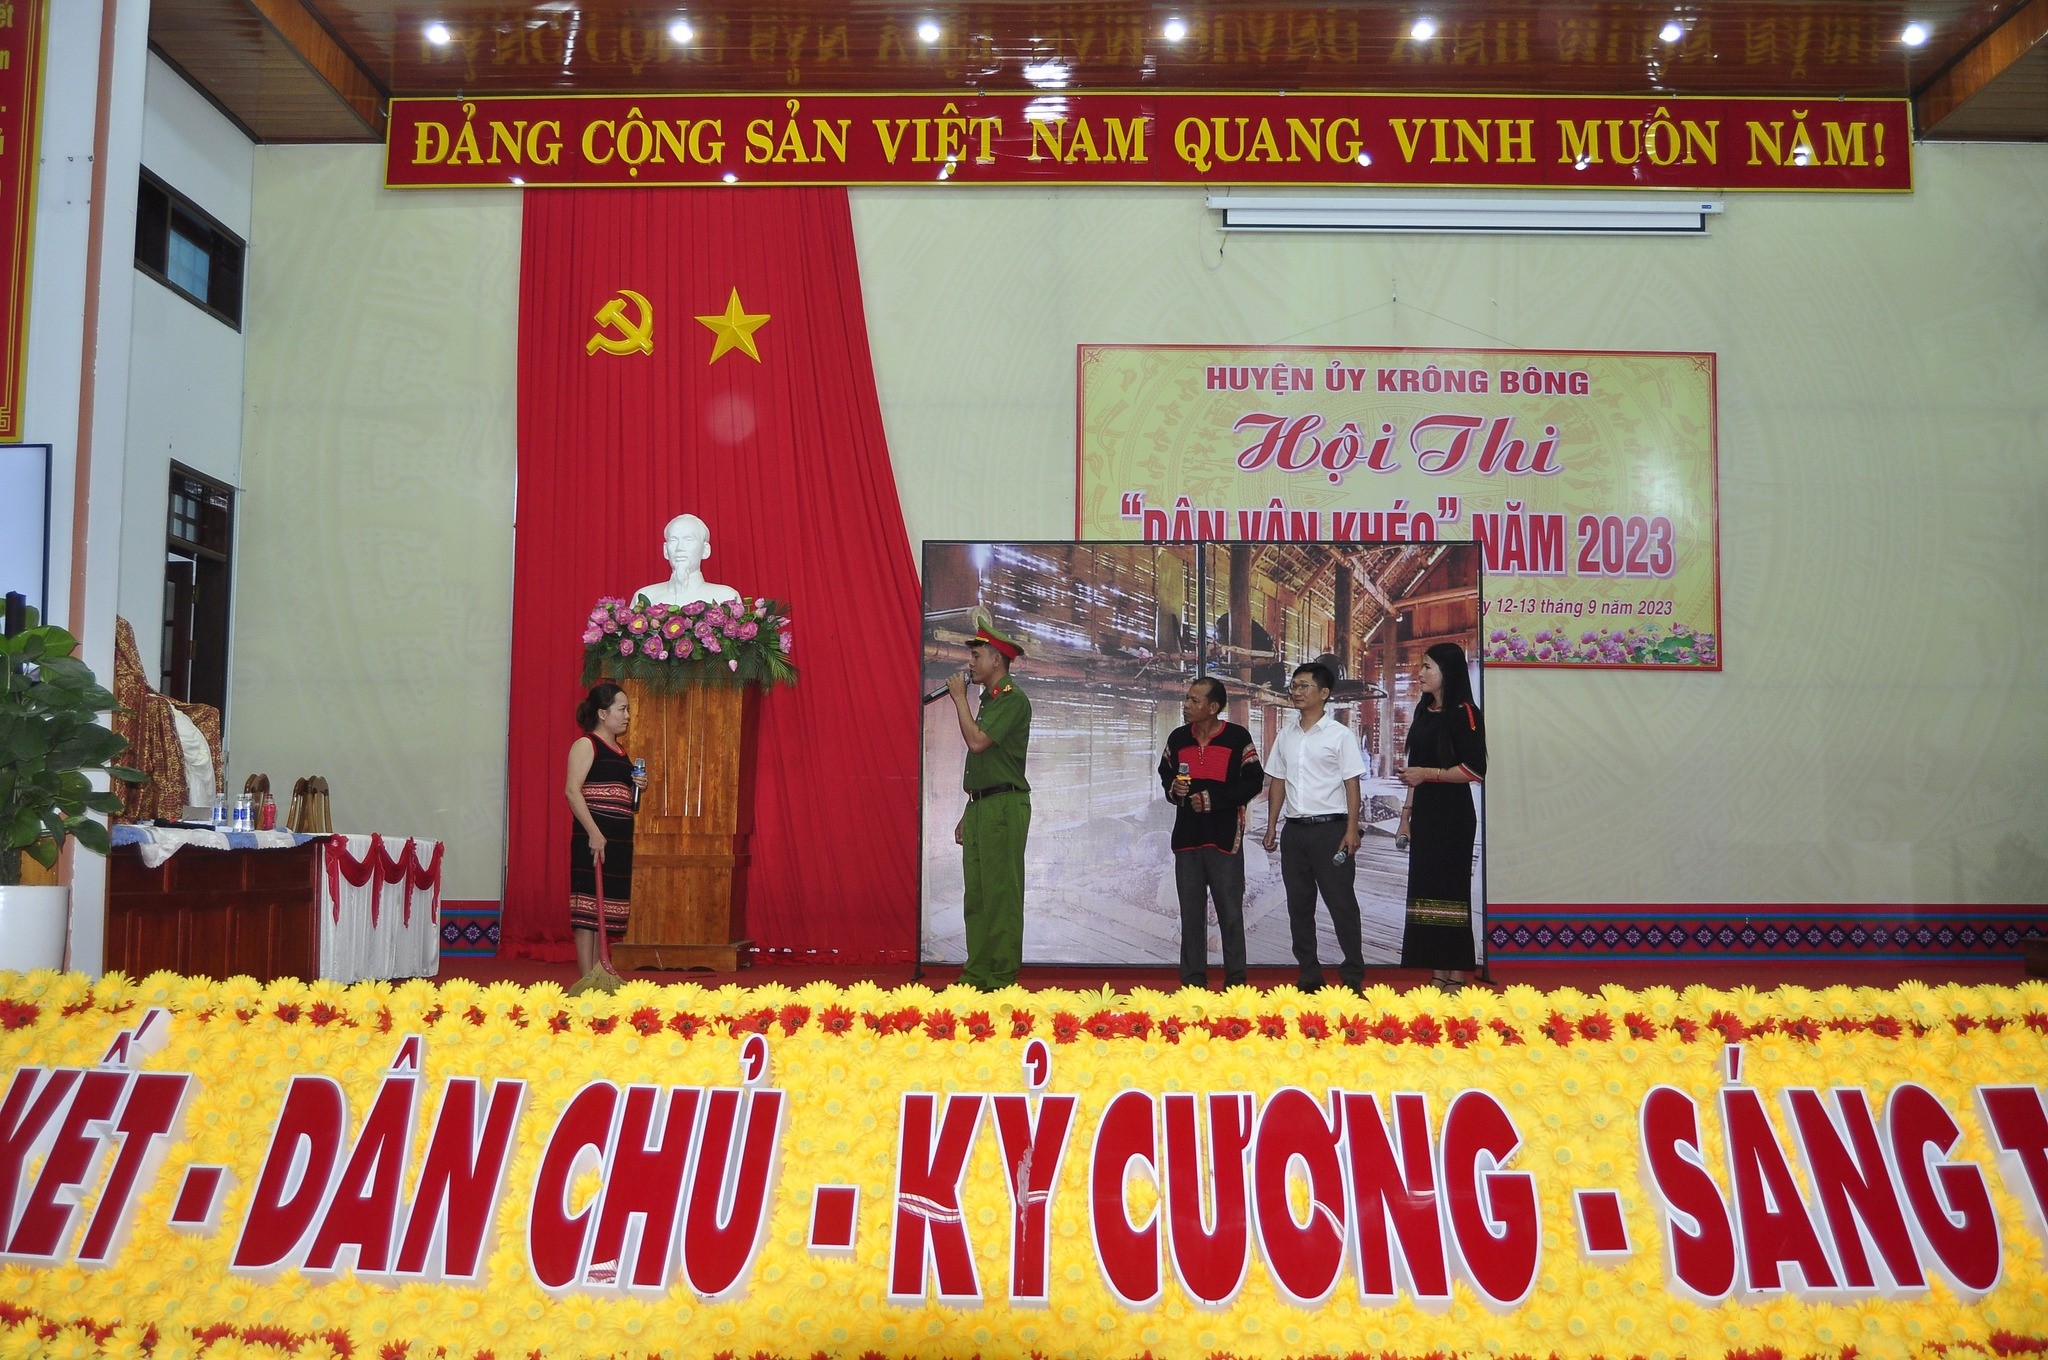 "Clever Mass Mobilization" Competition in Krong Bong District in 2023